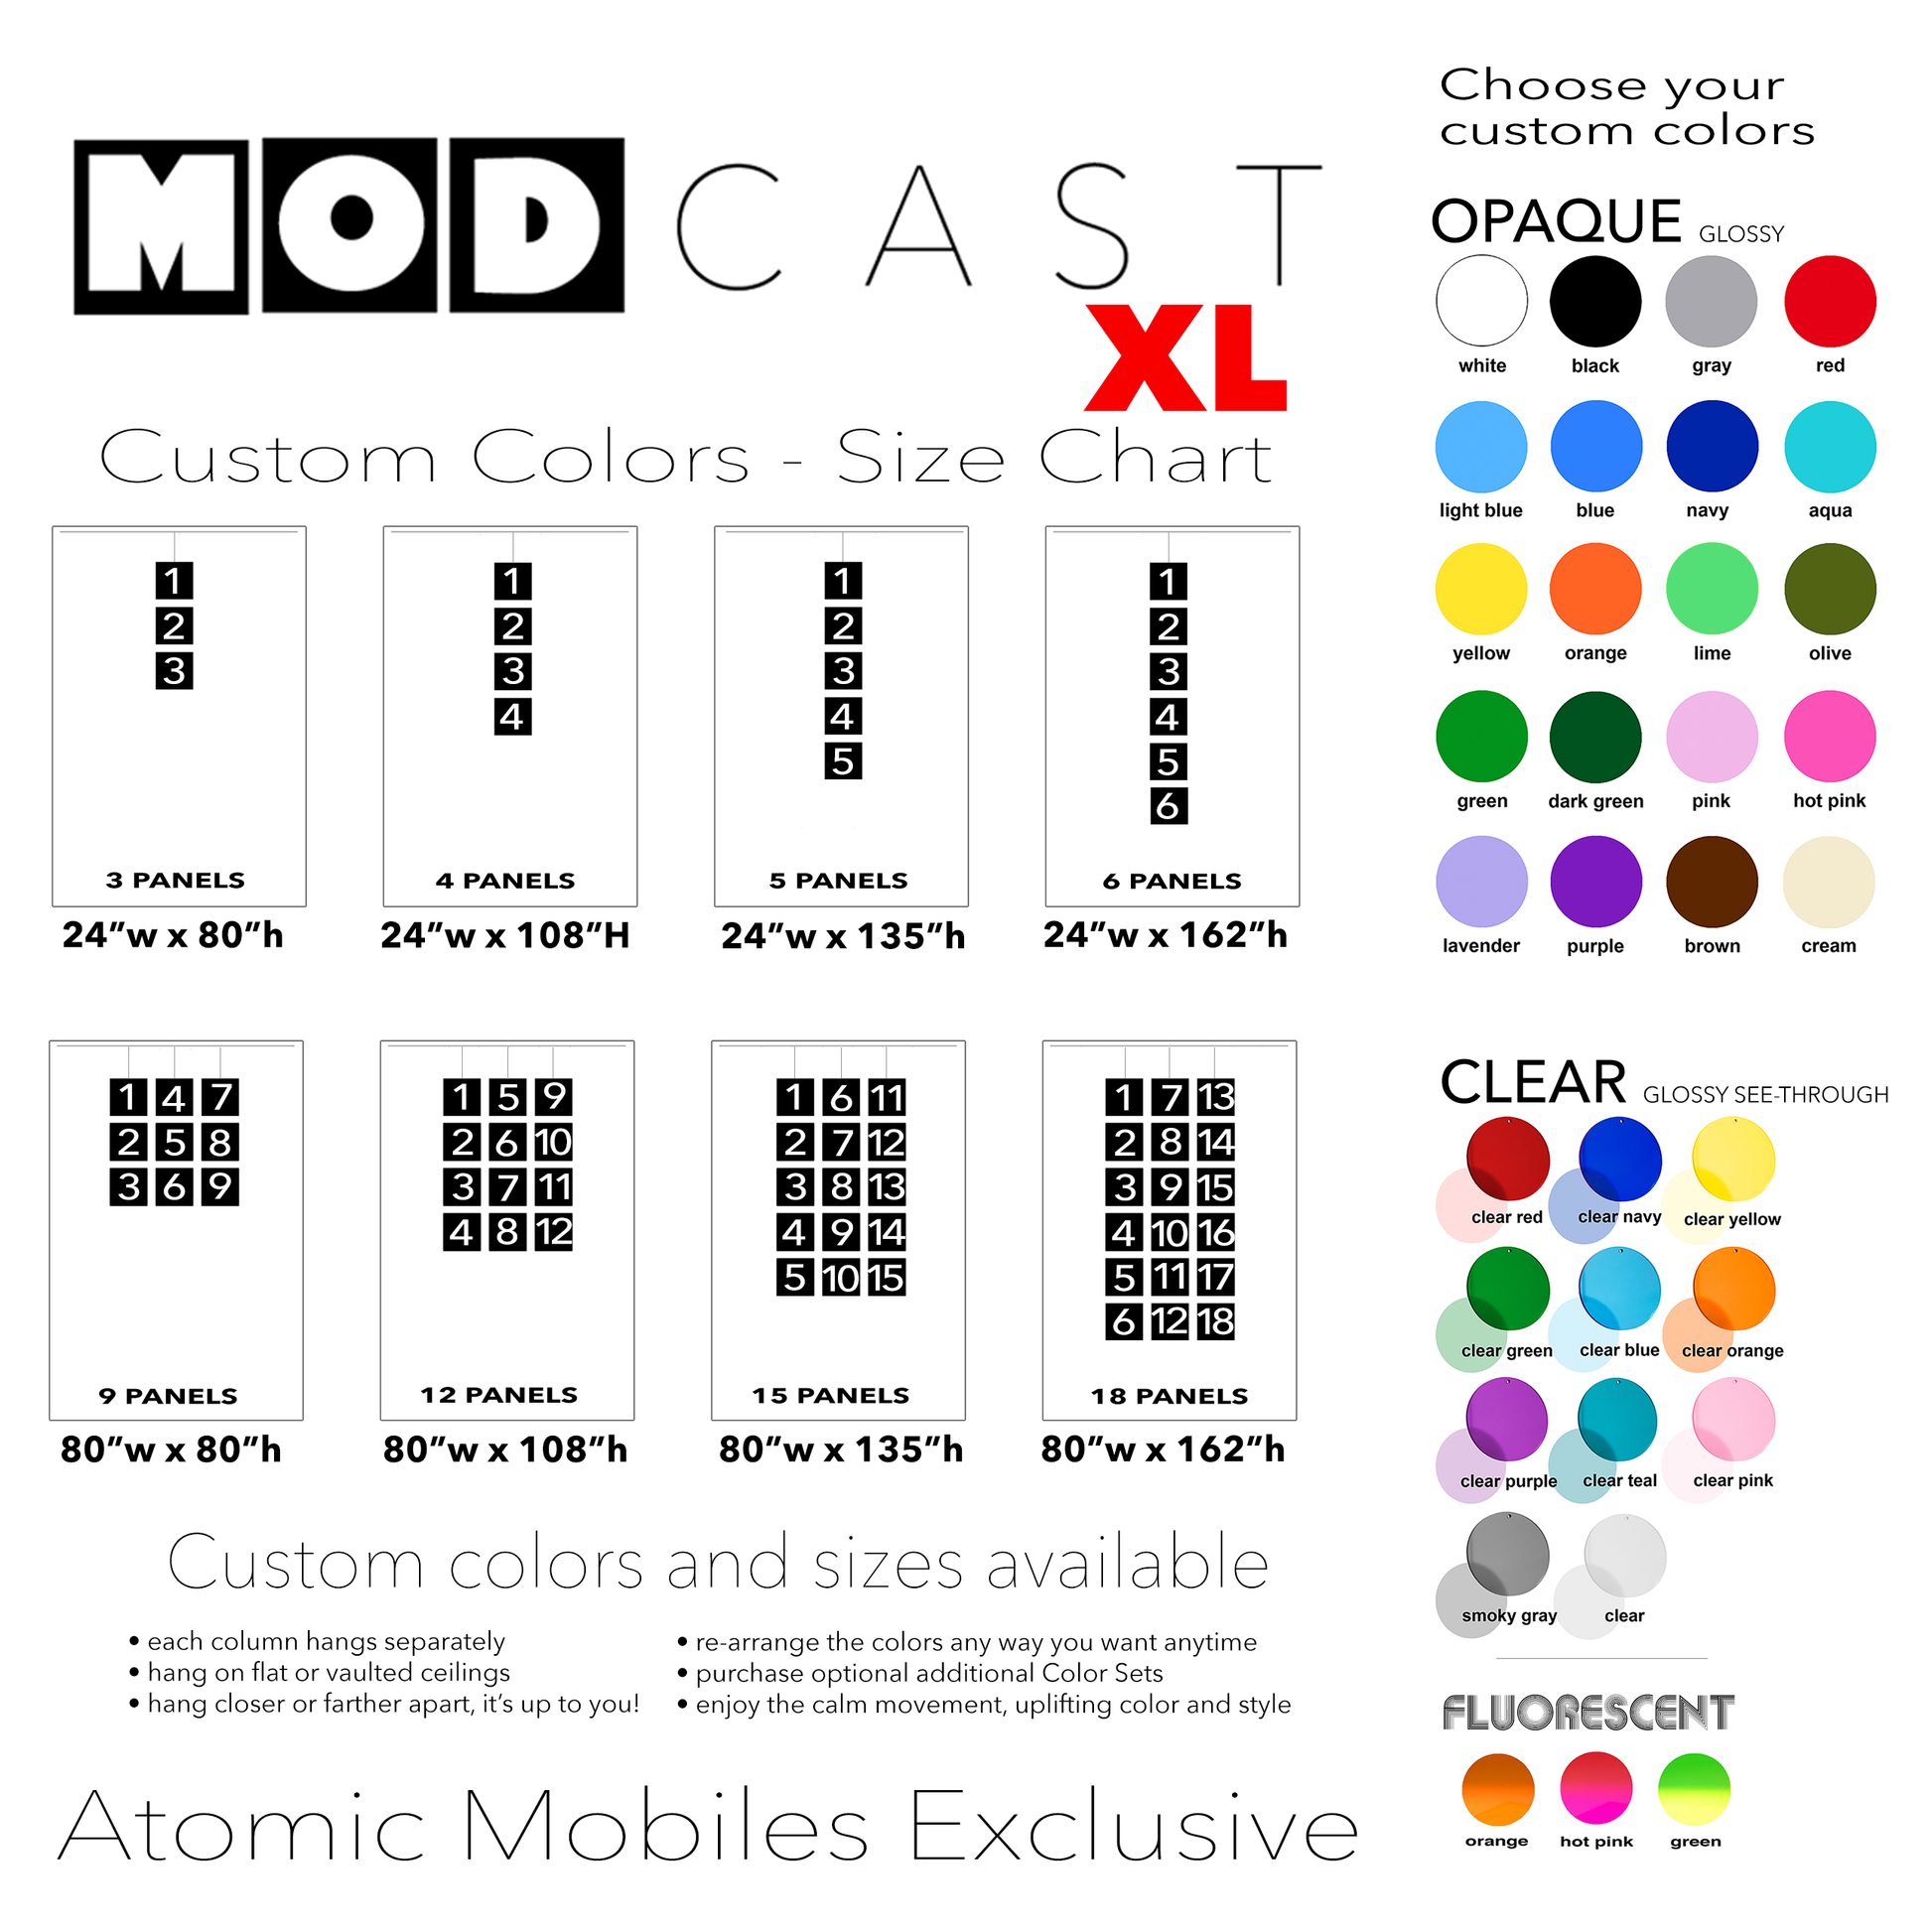 Color Chart and Sizes for XL MODcast hanging art mobiles in 34 acrylic plexiglass colors - kinetic mid century modern style home decorations by AtomicMobiles.com